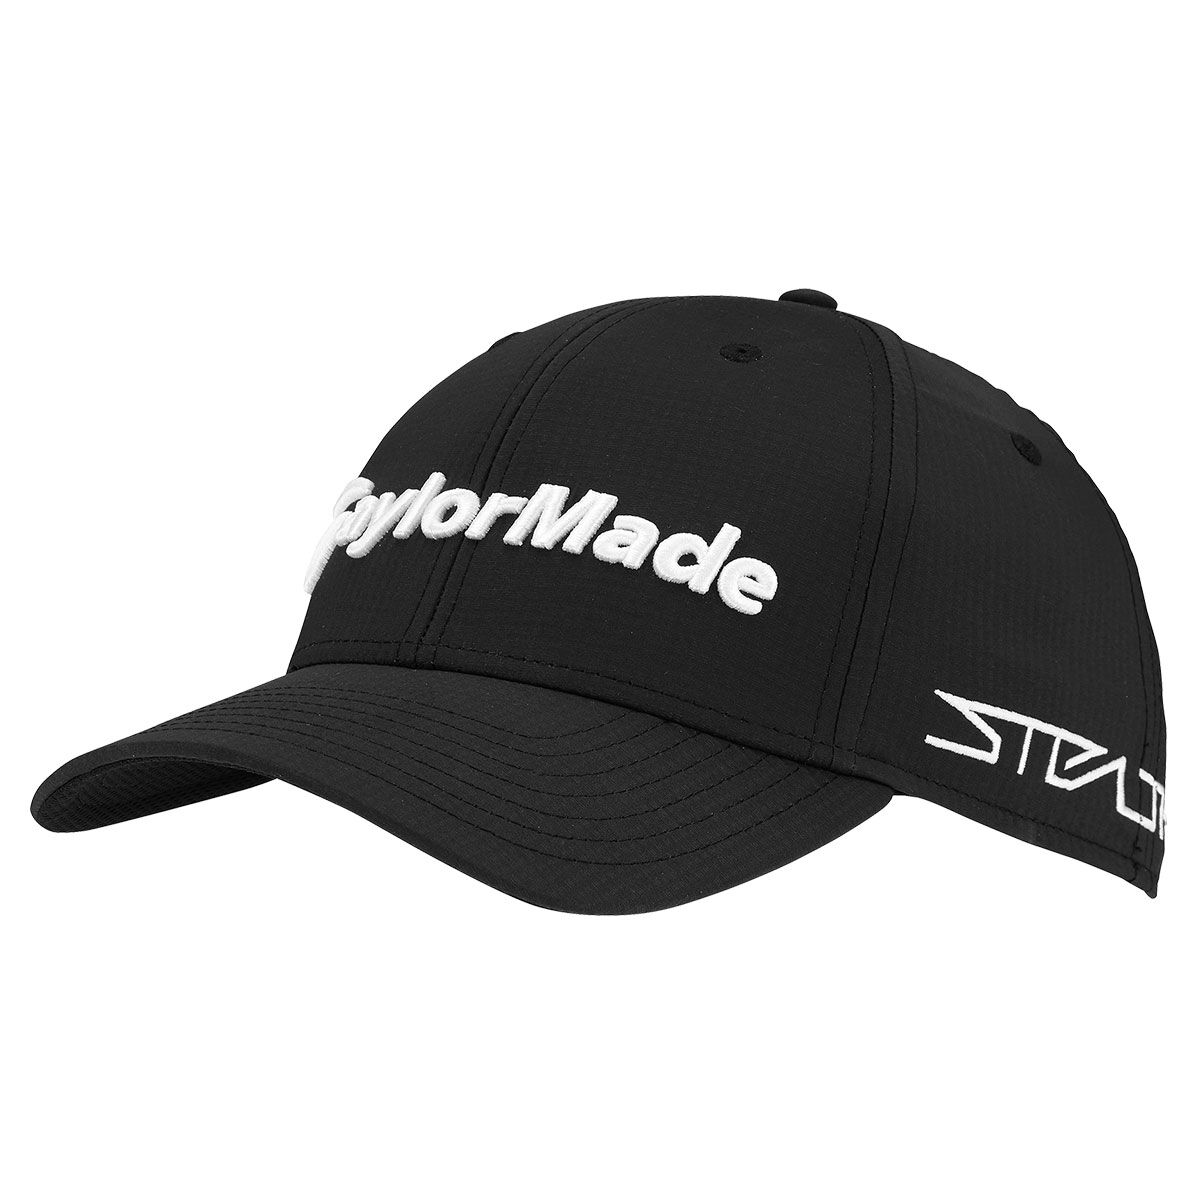 TaylorMade Men’s Black and White Comfortable Embroidered Tour Radar Golf Cap | American Golf, One Size